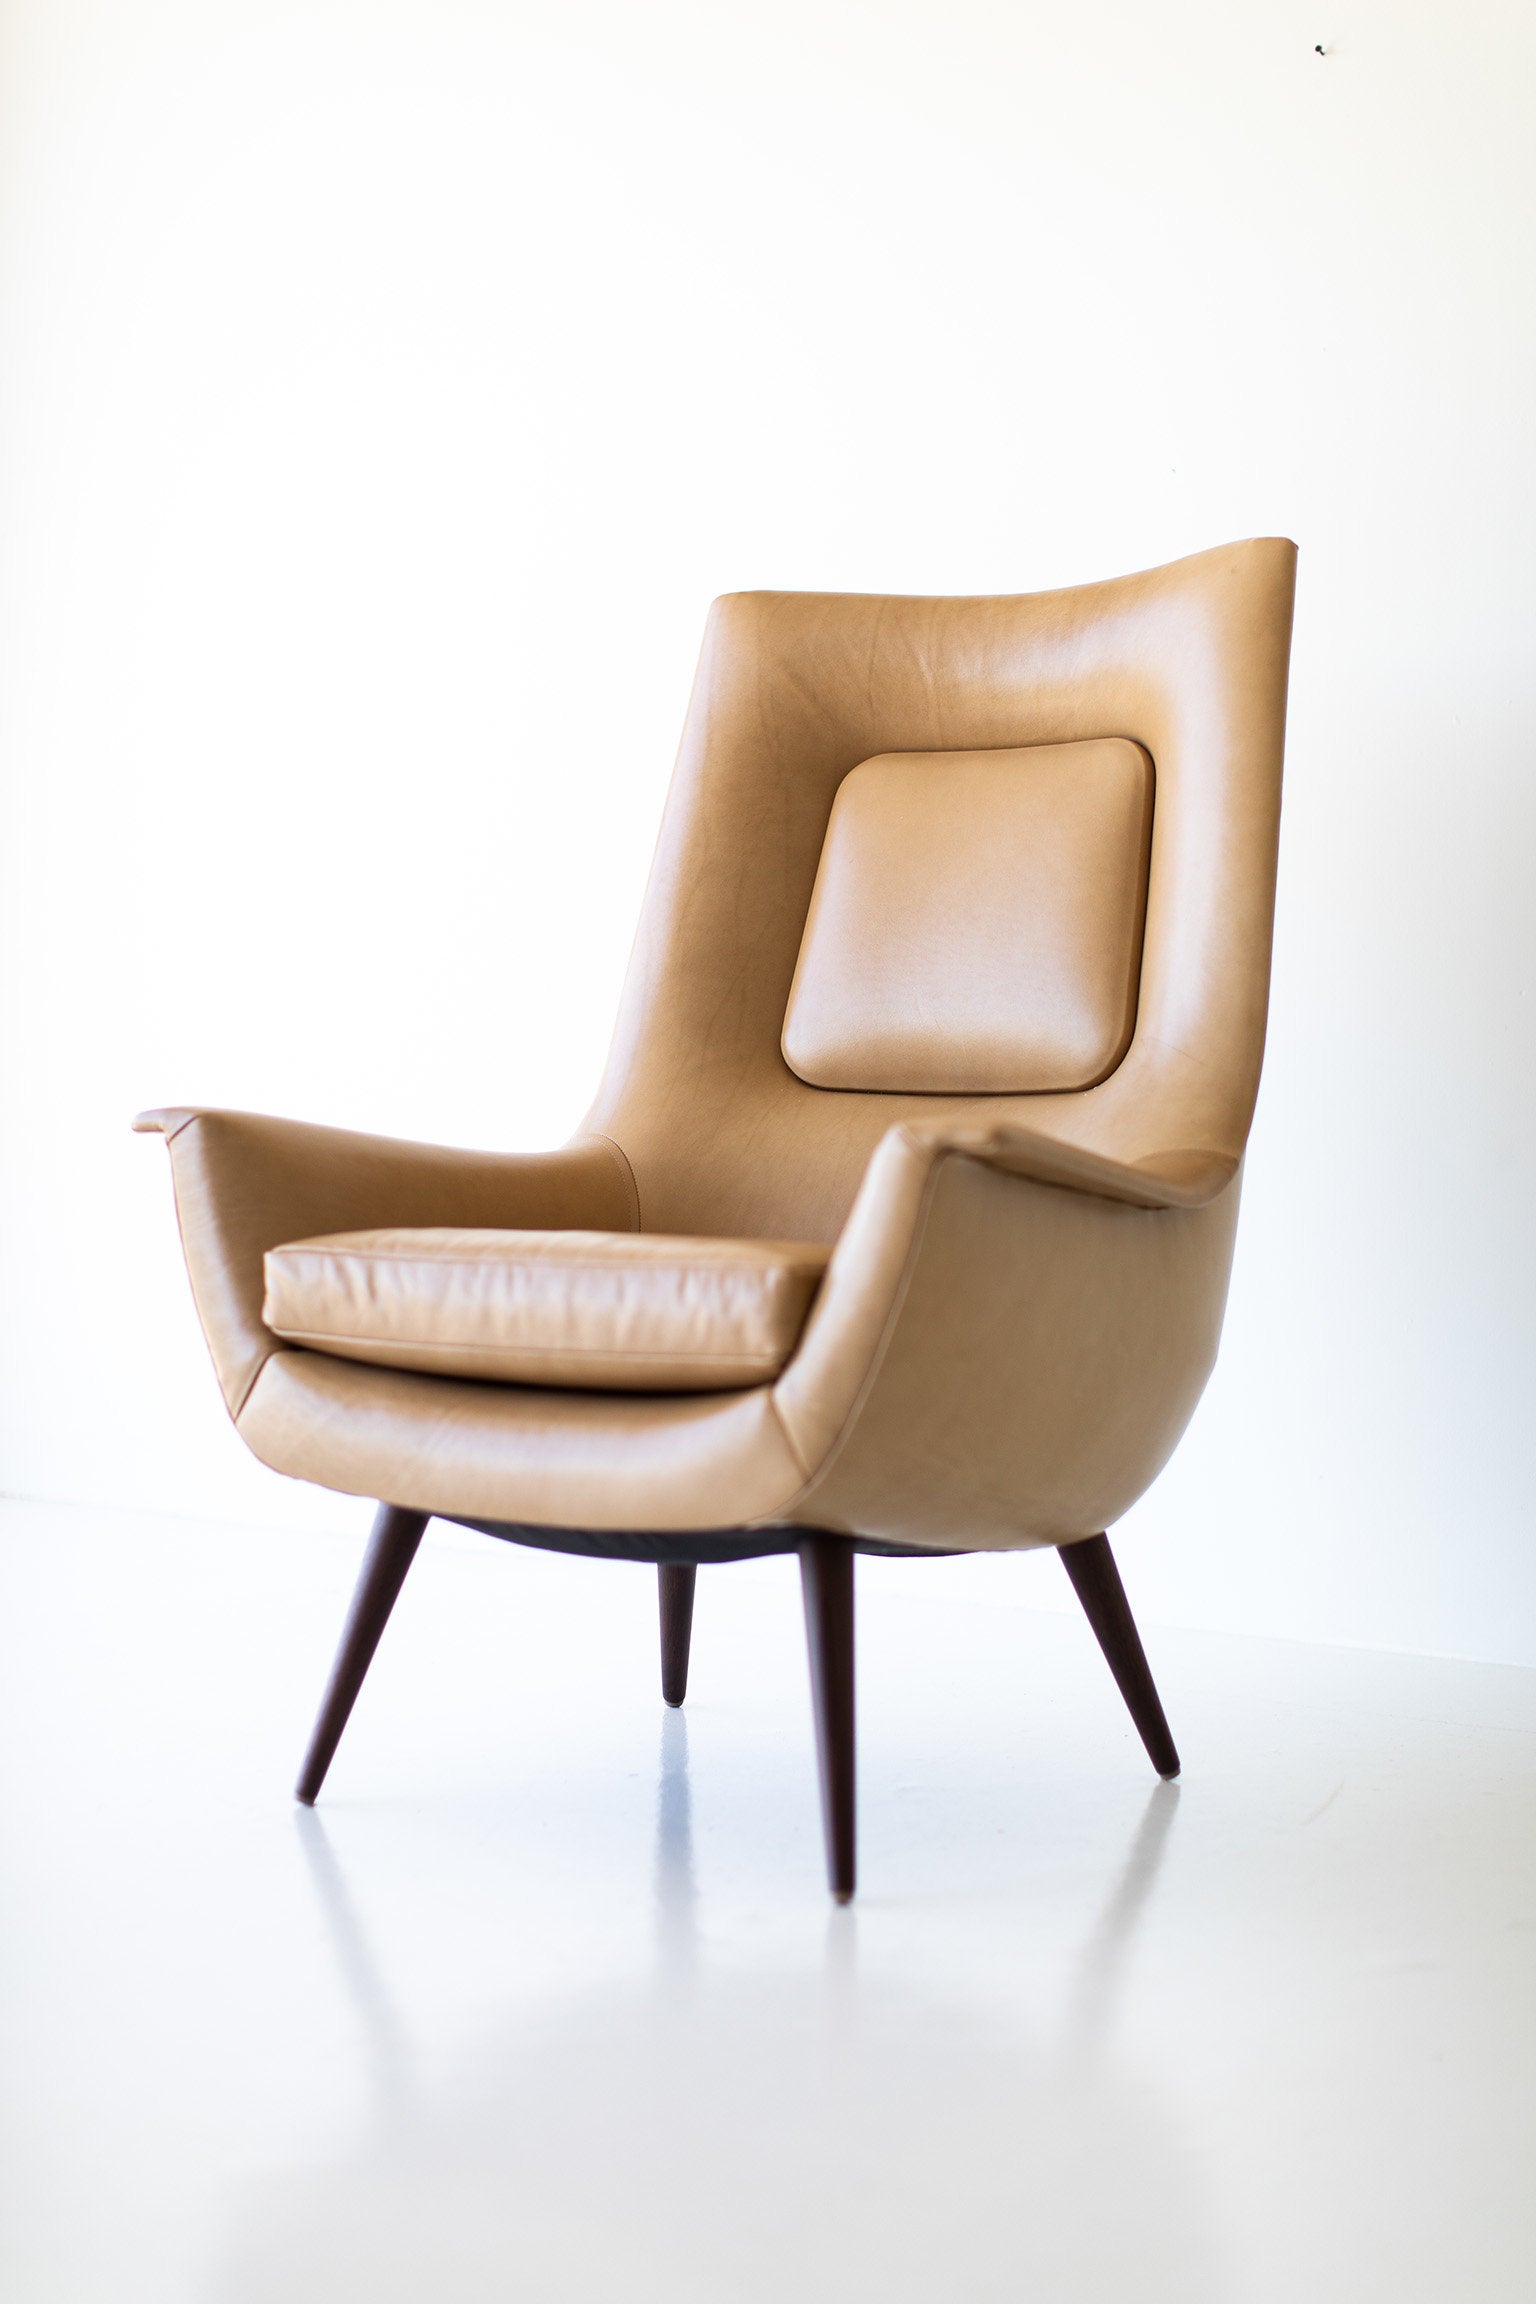 lawrence-peabody-chair-01